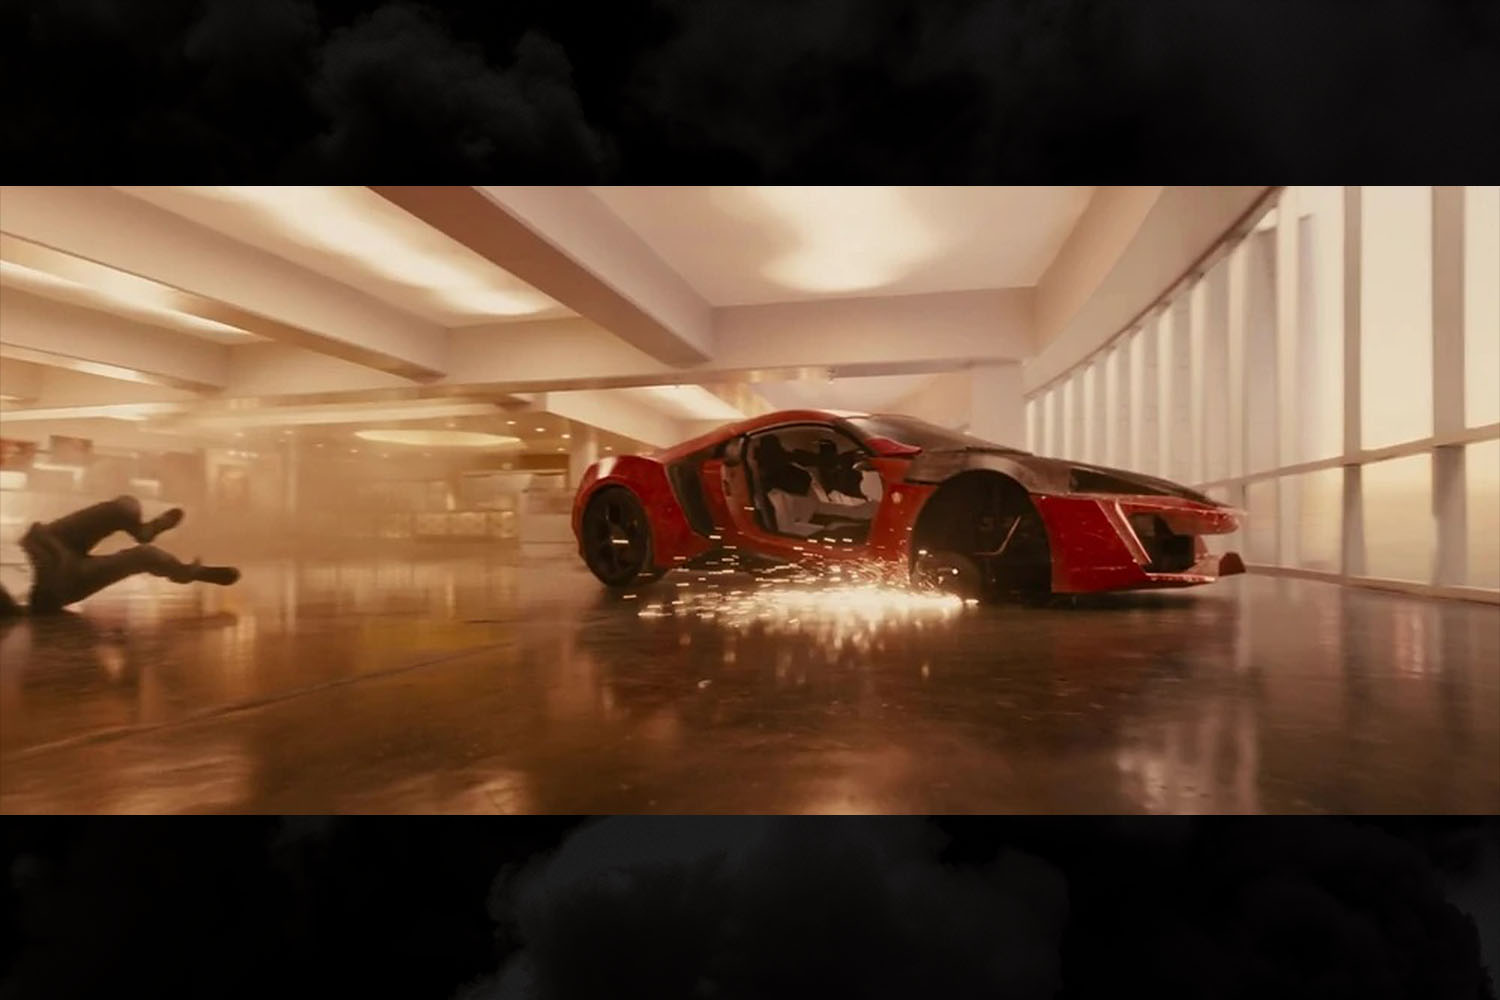 The red W Motors Lykan HyperSport getting wrecked as Dom and Brian jump it through skyscrapers in the movie "Furious 7"